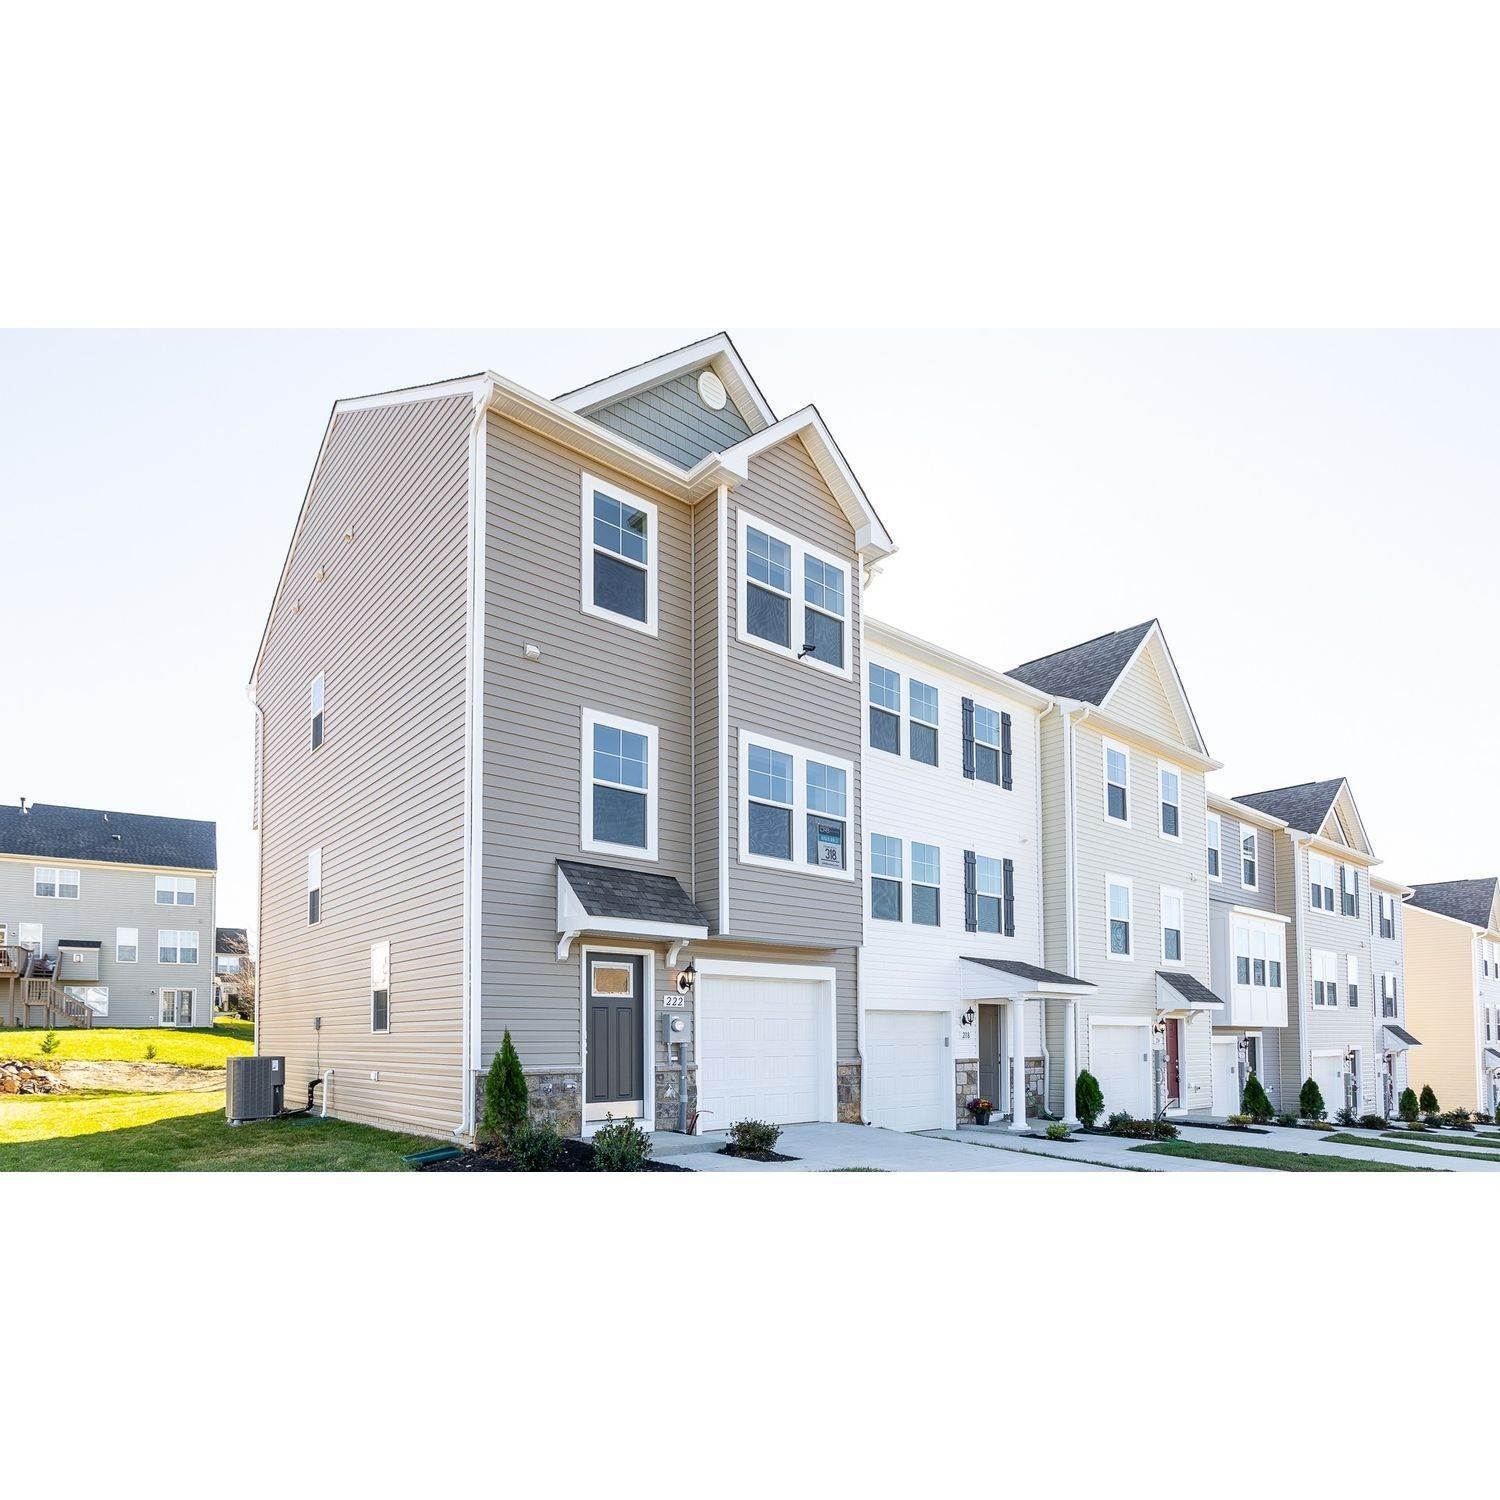 3. Archer's Rock Townhomes xây dựng tại 46 Capshaw Road, Martinsburg, WV 25403